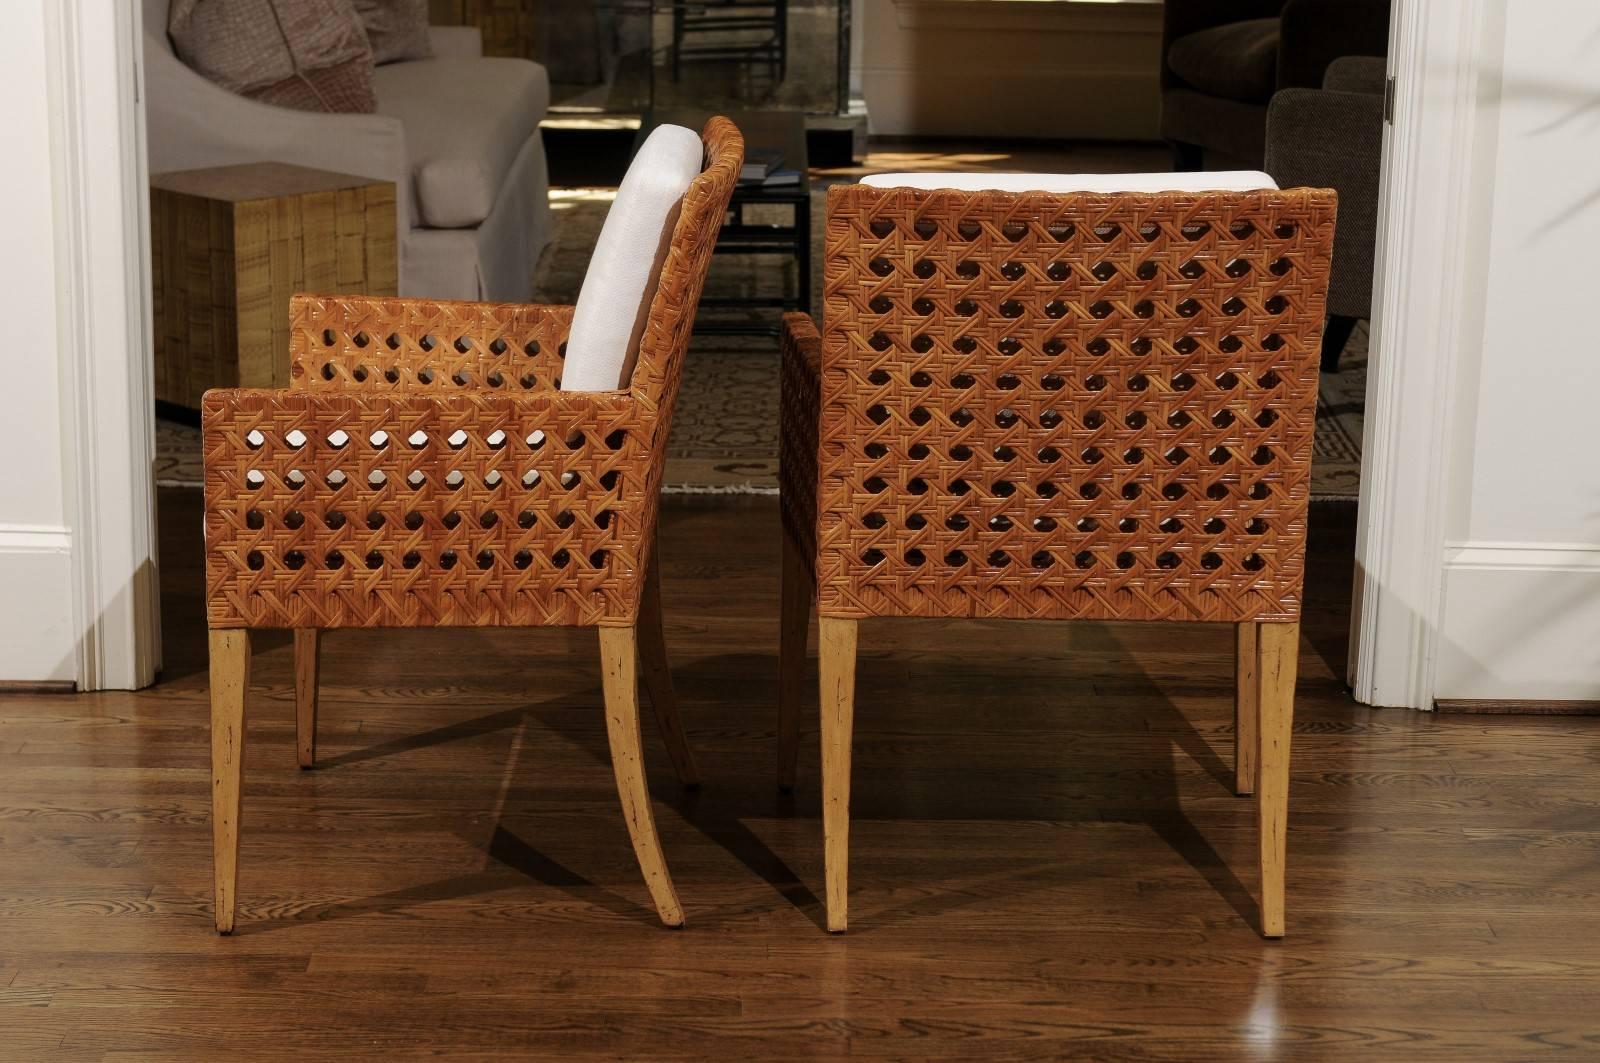 Stunning Restored Pair of Large-Scale Vintage Cane Armchairs, circa 1975 For Sale 1